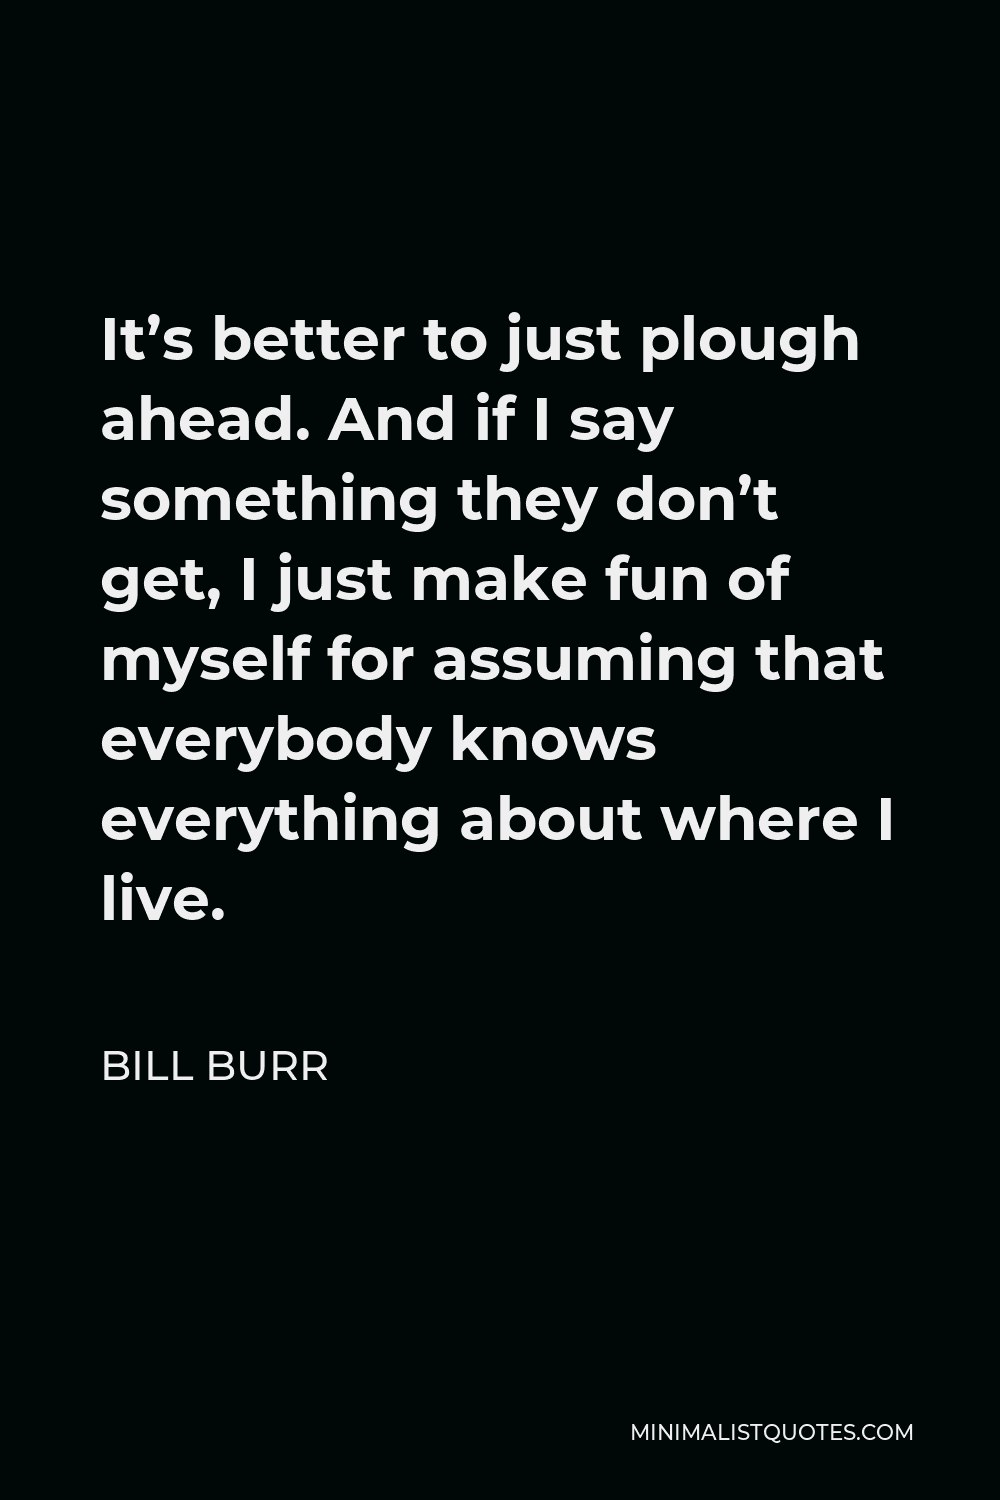 Bill Burr Quote - It’s better to just plough ahead. And if I say something they don’t get, I just make fun of myself for assuming that everybody knows everything about where I live.